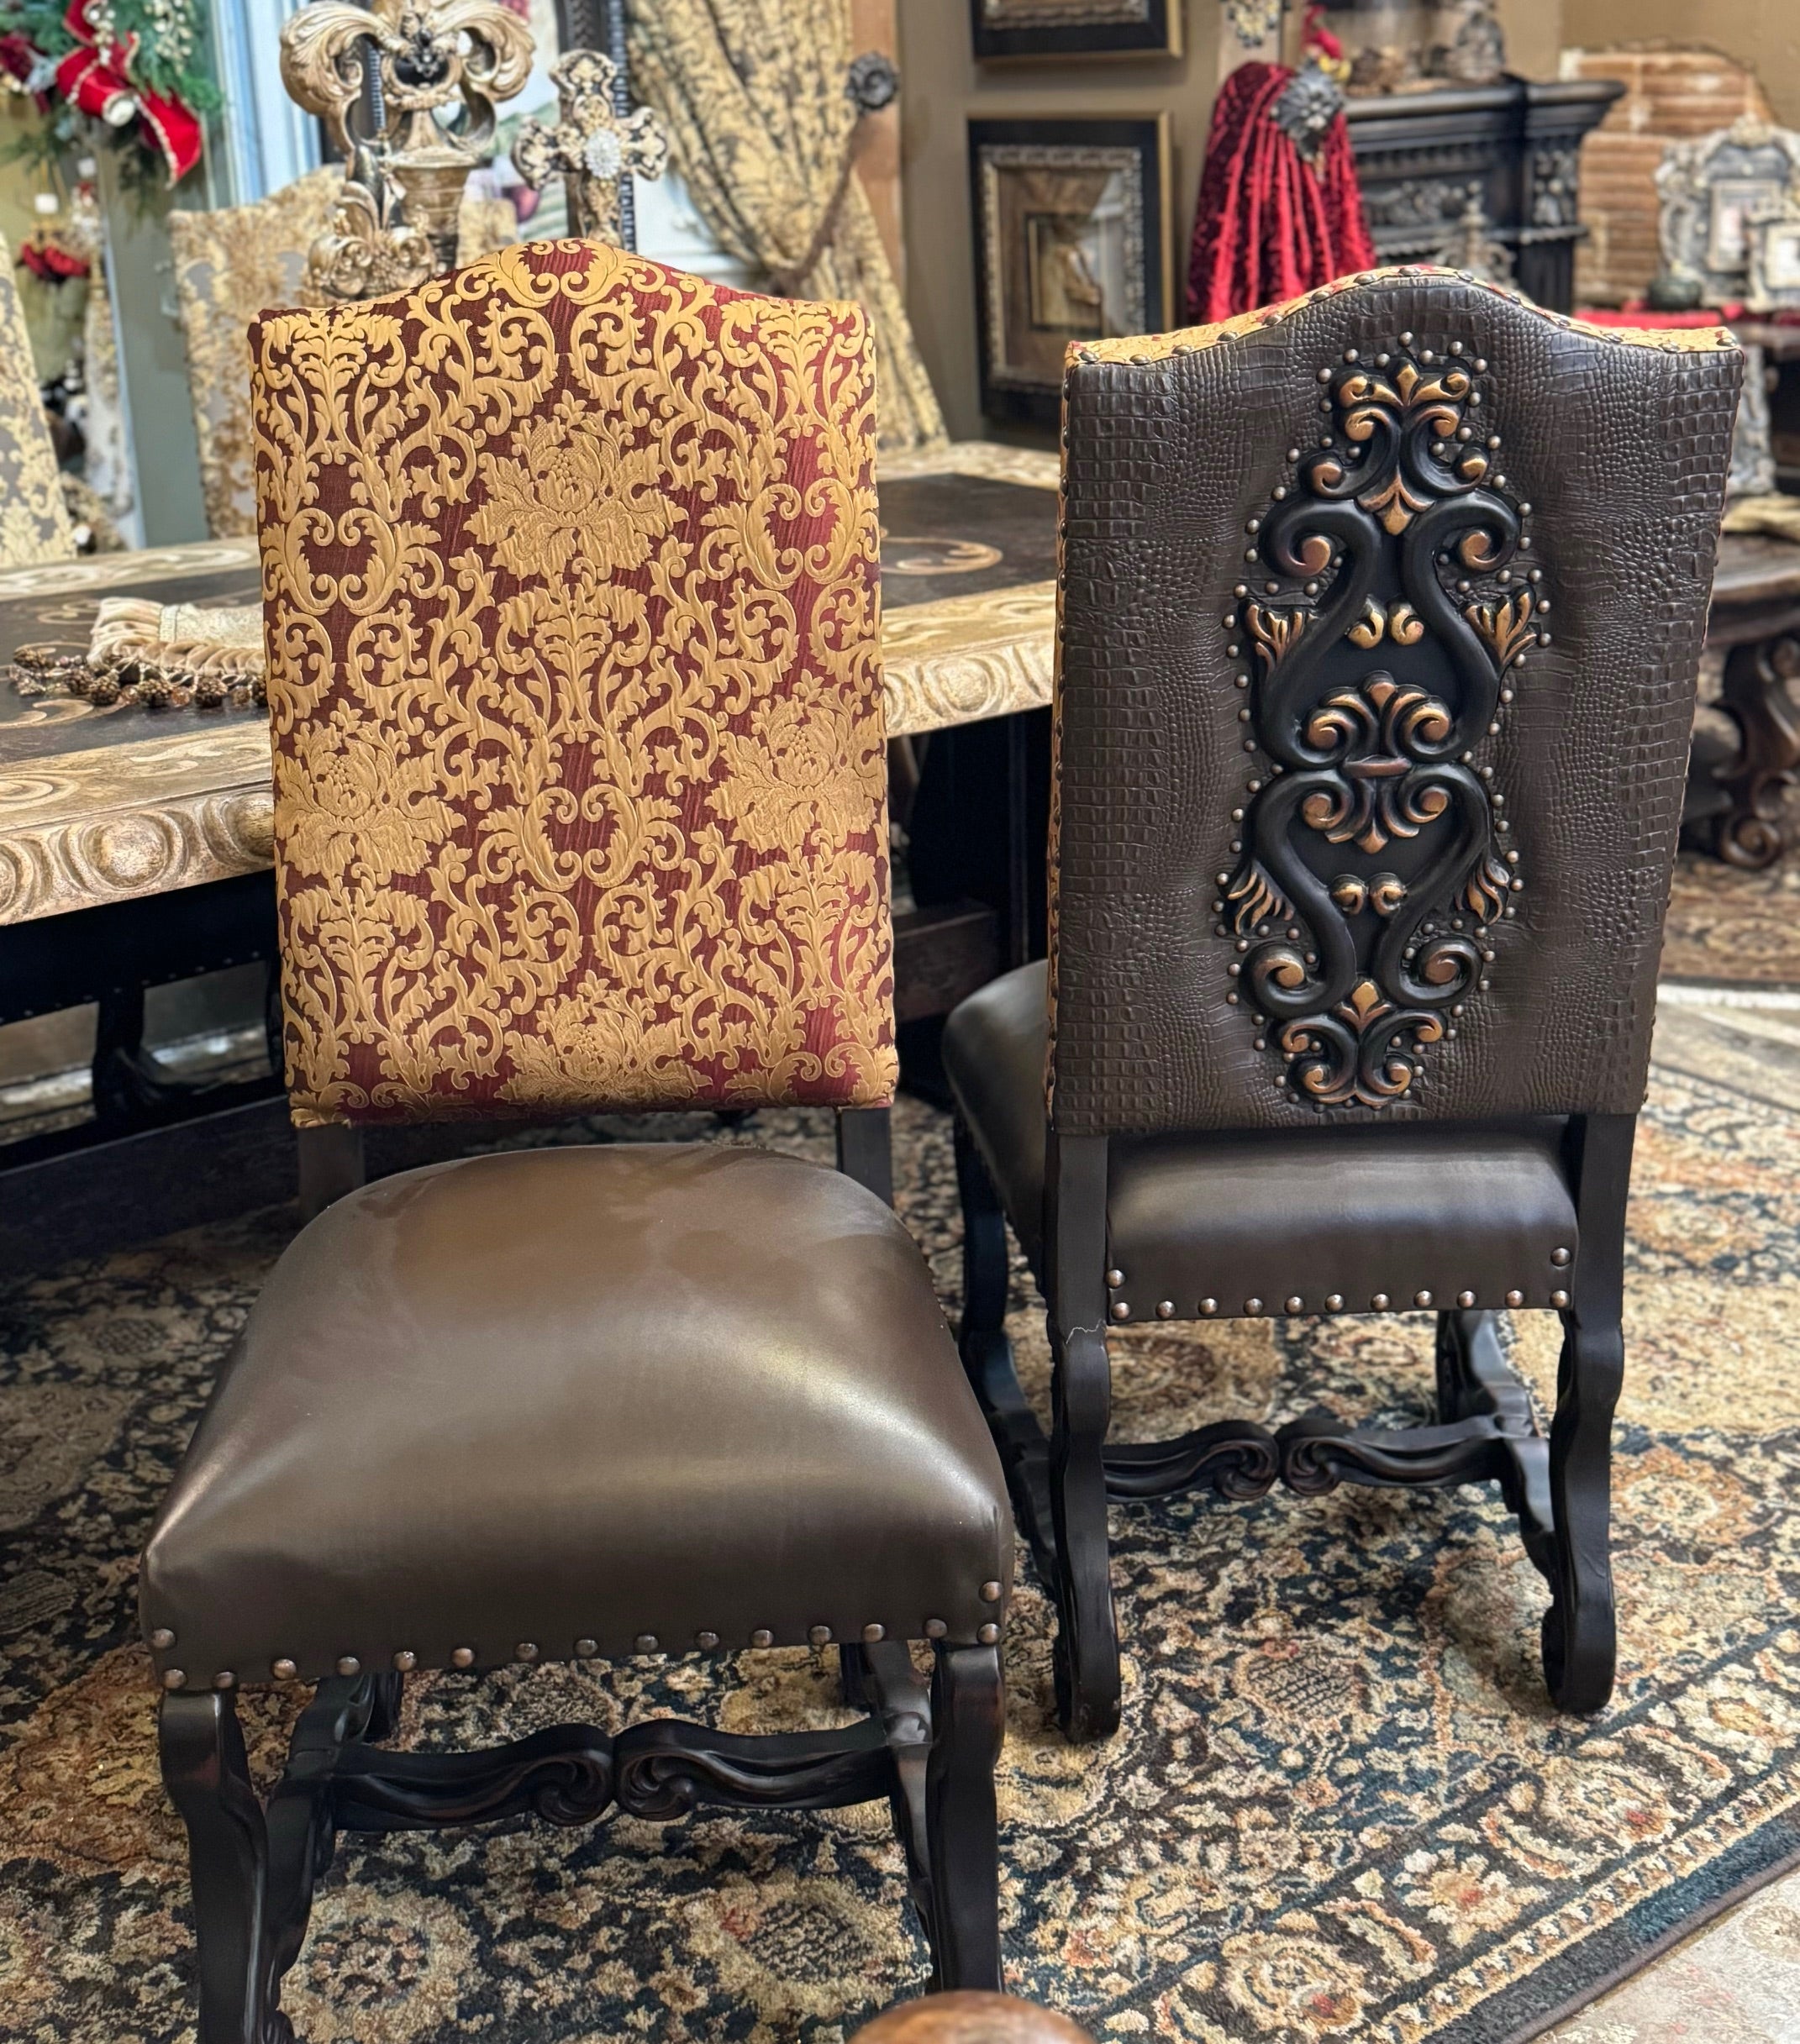 Old World Upholstered Dining Room Chair Burgundy and Gold Damask Print with Carved Detailing on Back